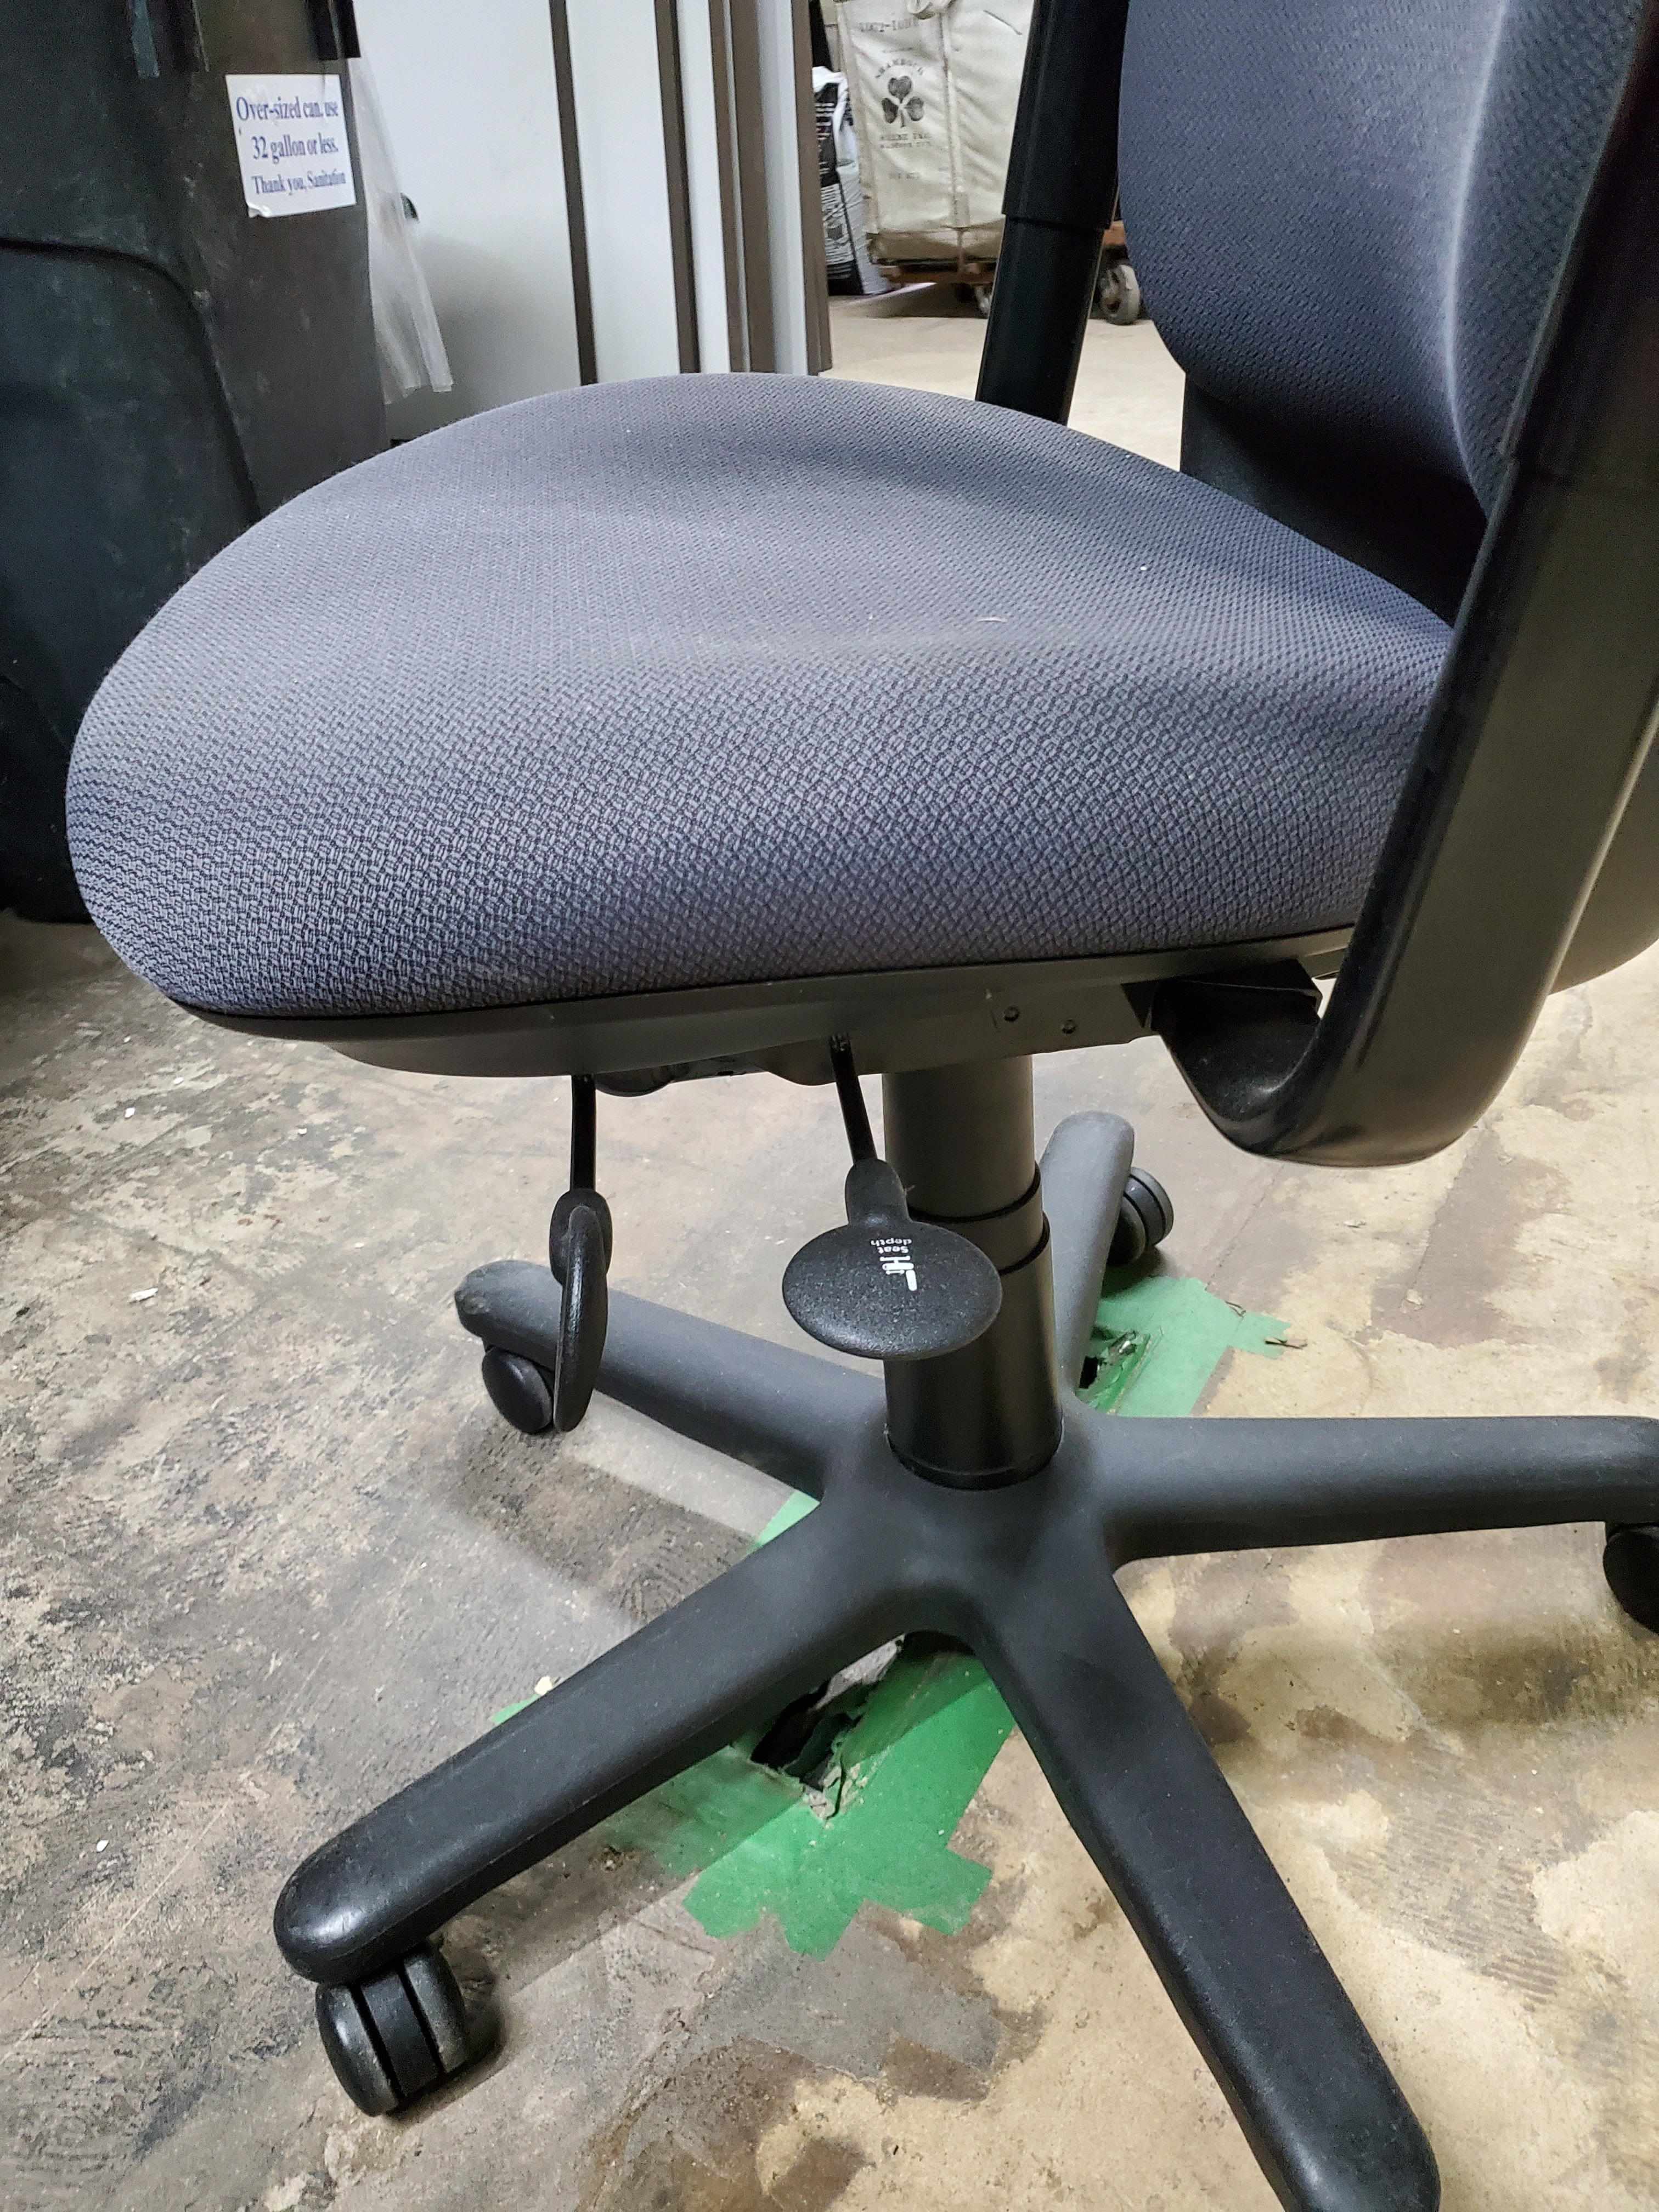 Steelcase Drive Chairs